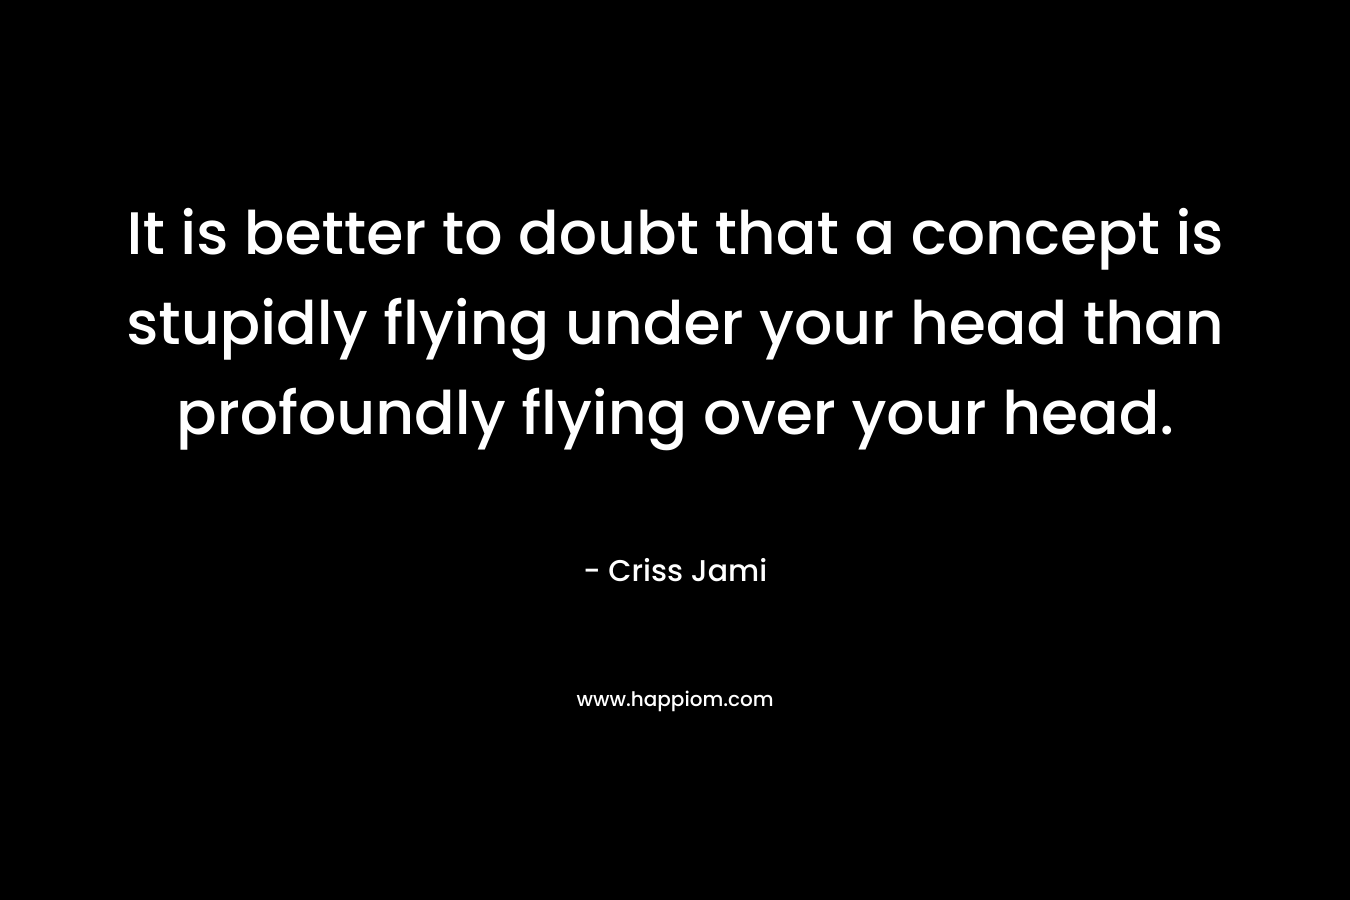 It is better to doubt that a concept is stupidly flying under your head than profoundly flying over your head.